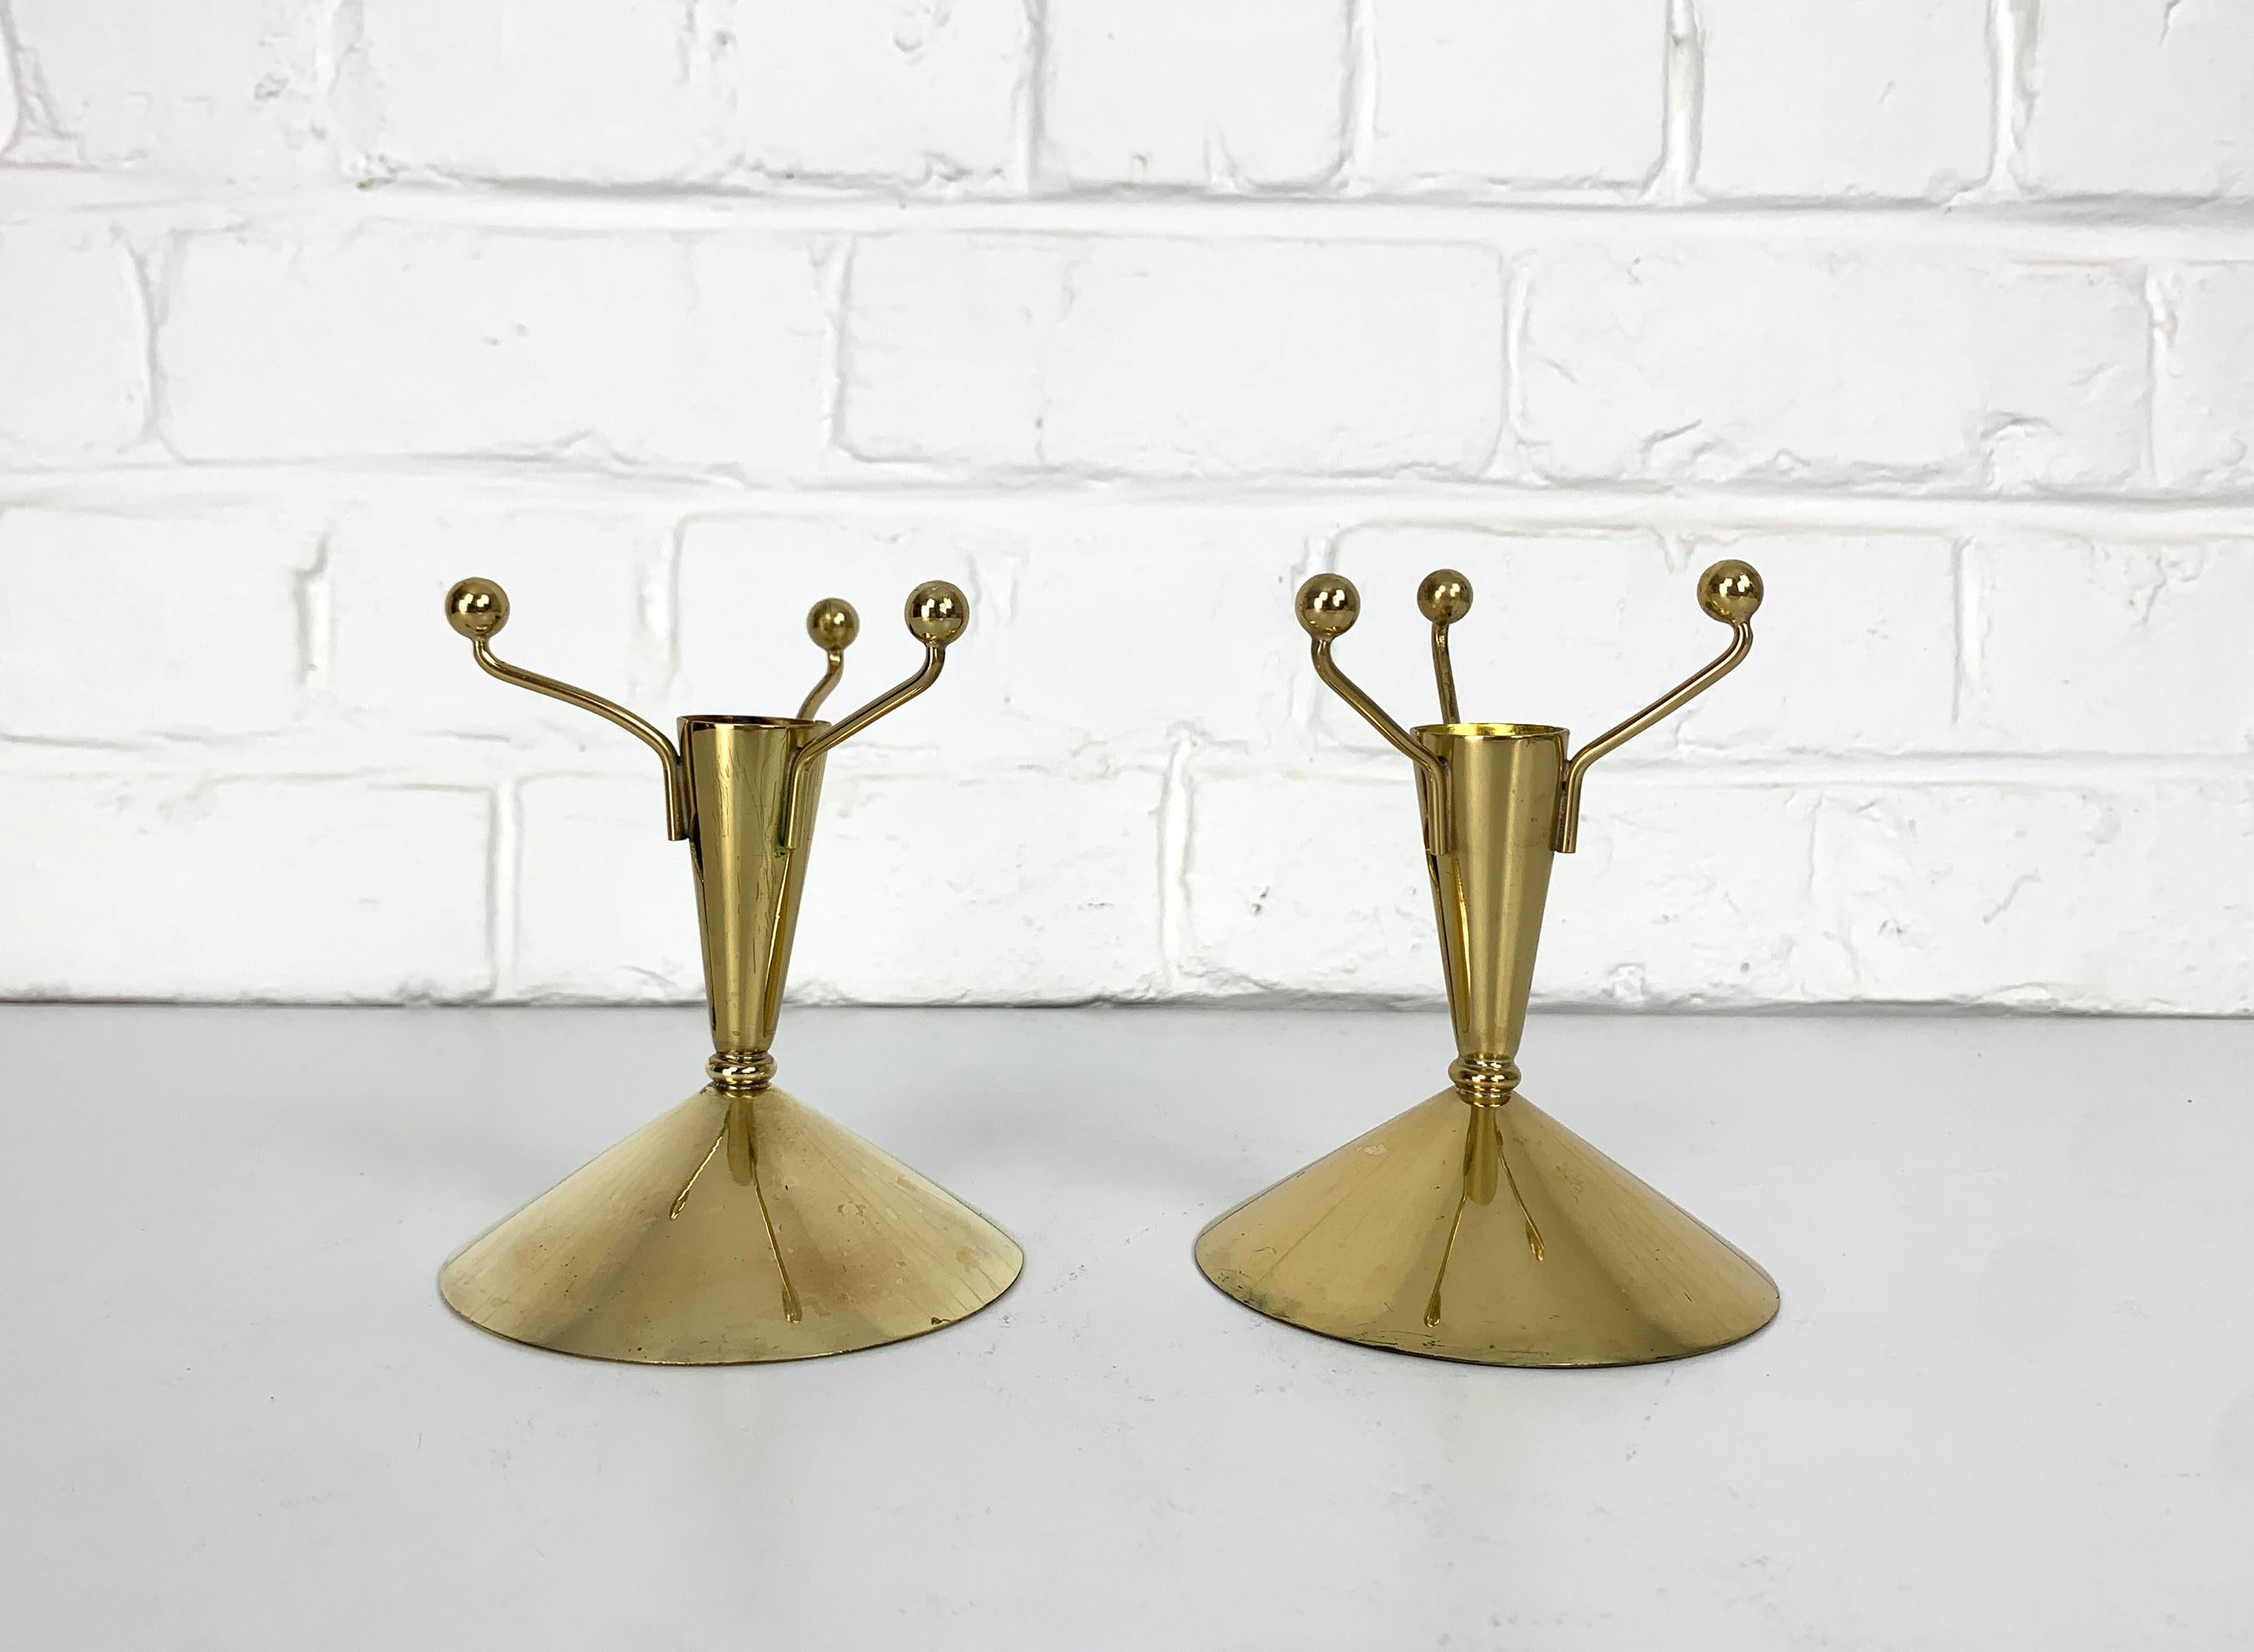 Pair of Swedish Modernist candle-sticks, designed by Gunnar Ander. Produced by Ystad-Metall, located in the town of Ystad in Sweden. 

Entirely made of brass, this playful design is based on a cone with 3 spheres connected by brass rods. It reminds